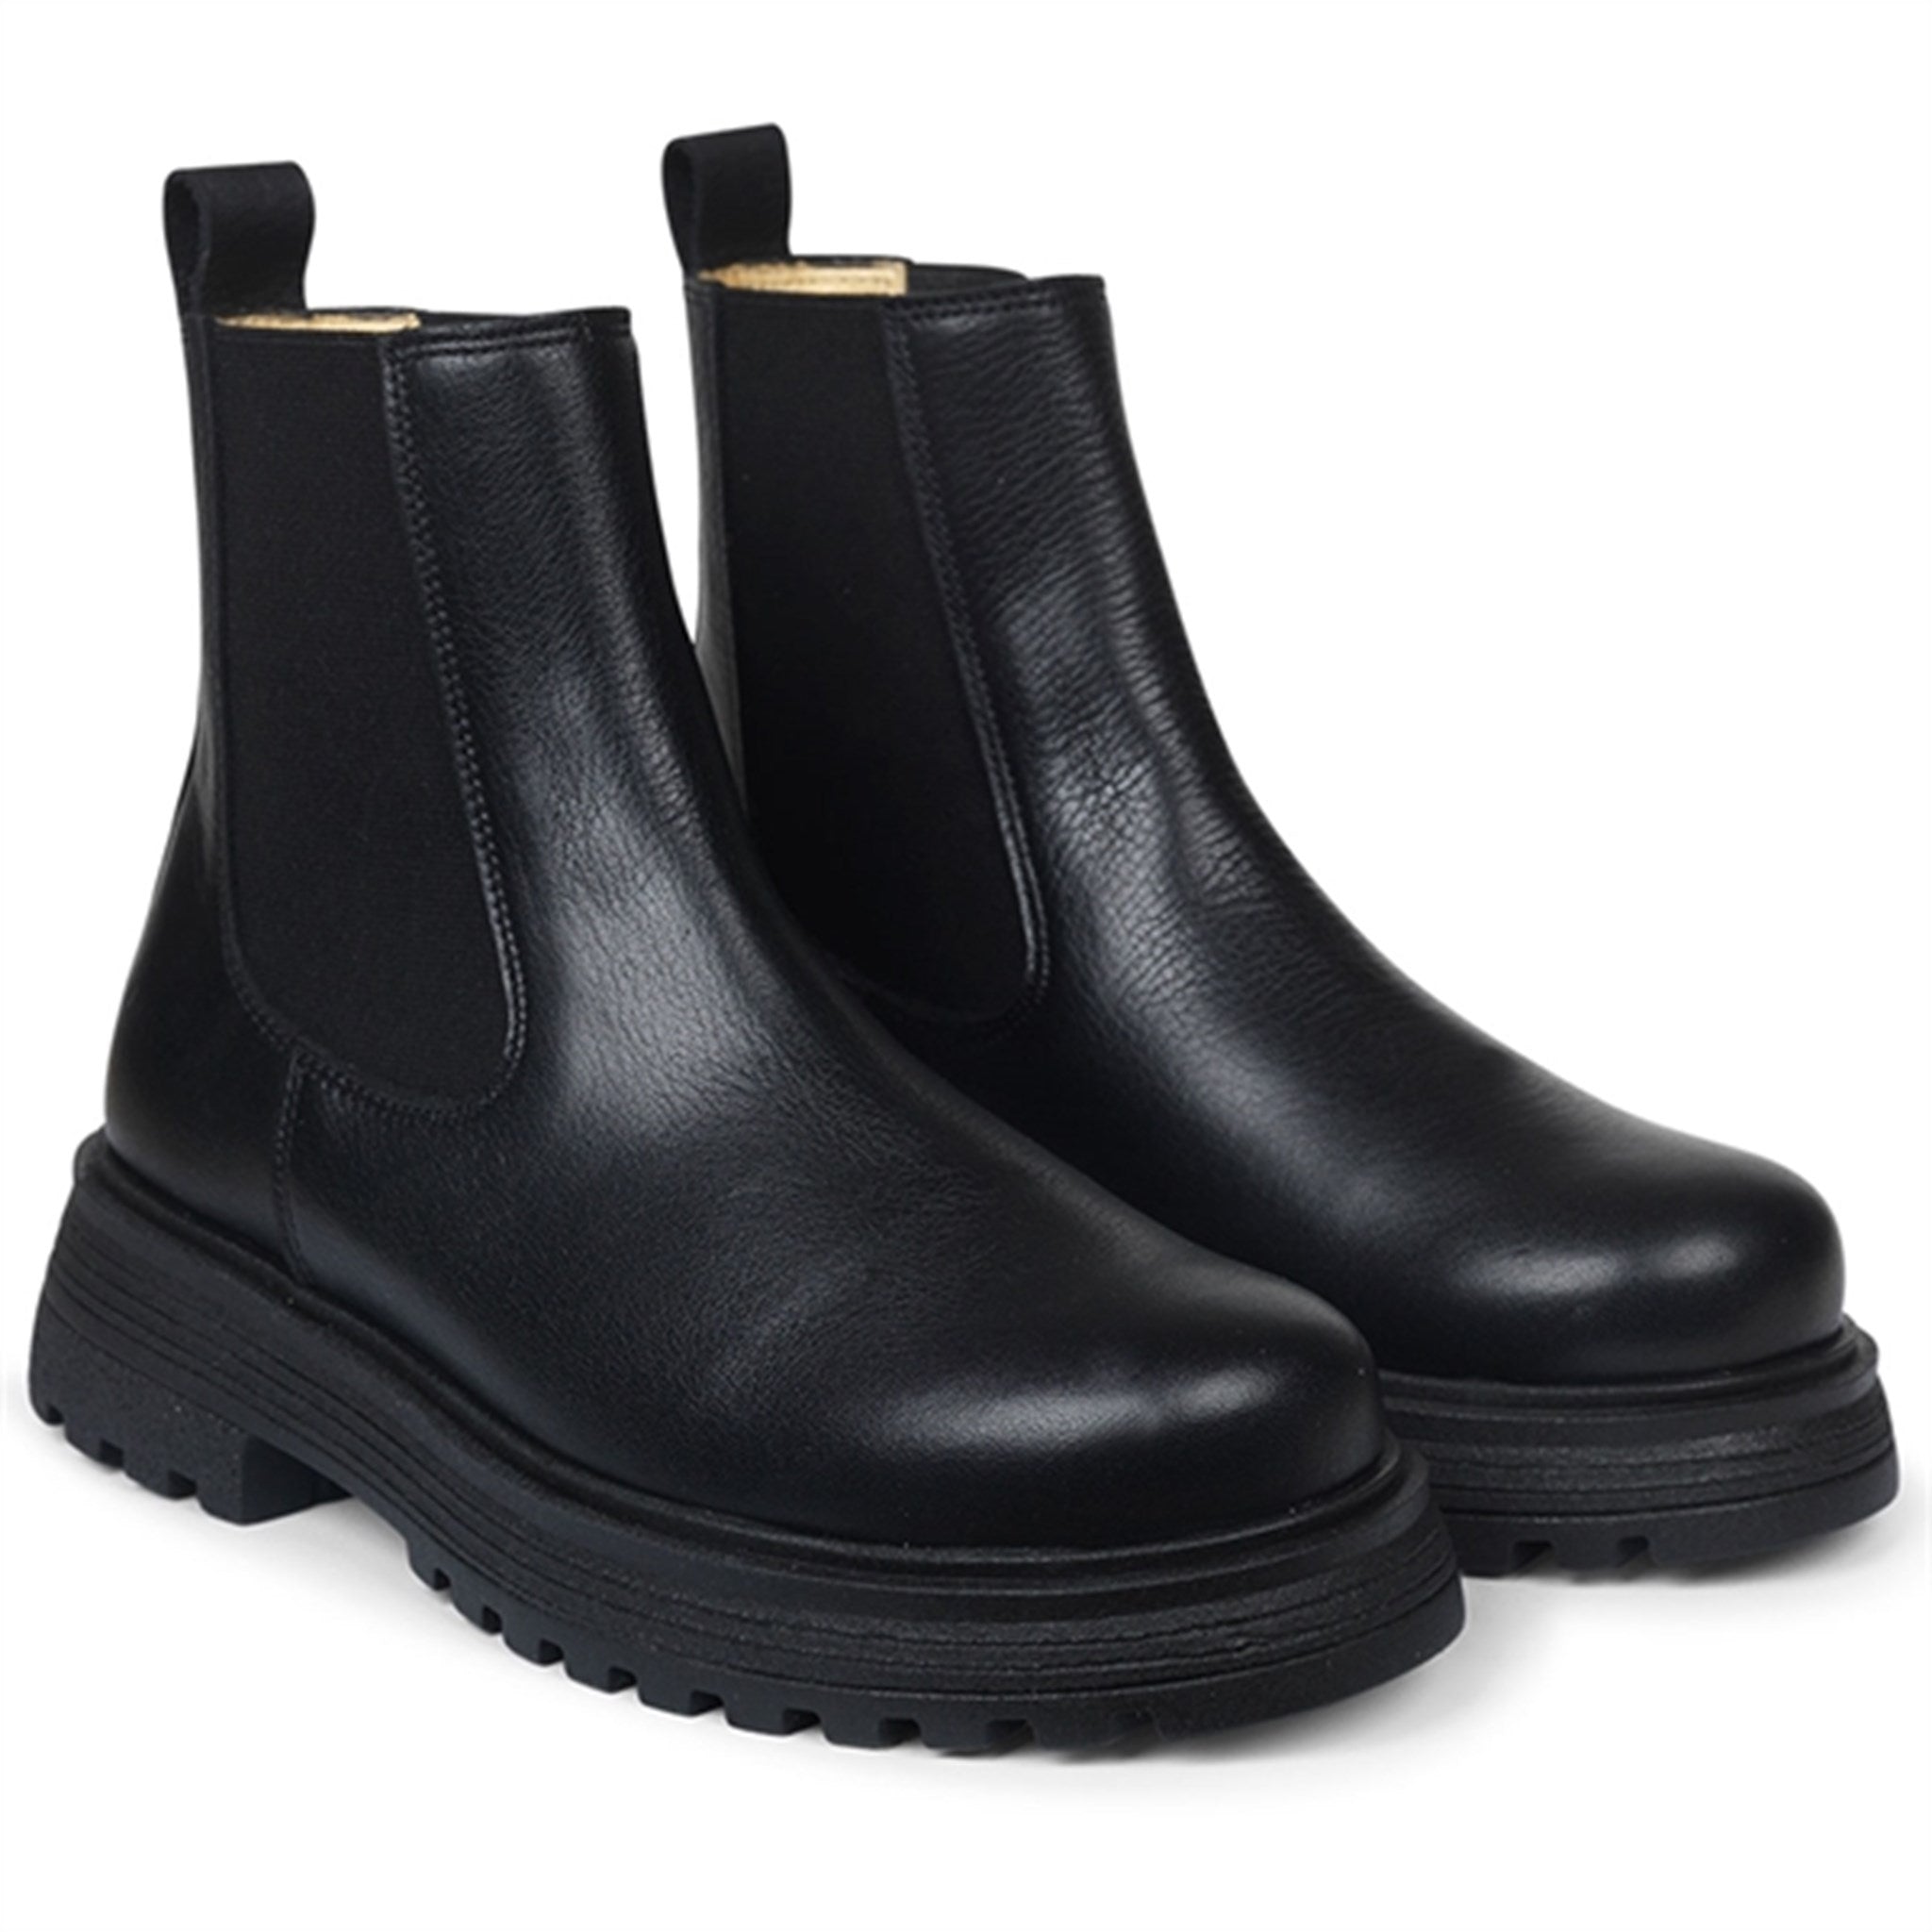 Angulus Chelsea Boots With Track Sole Black/Black